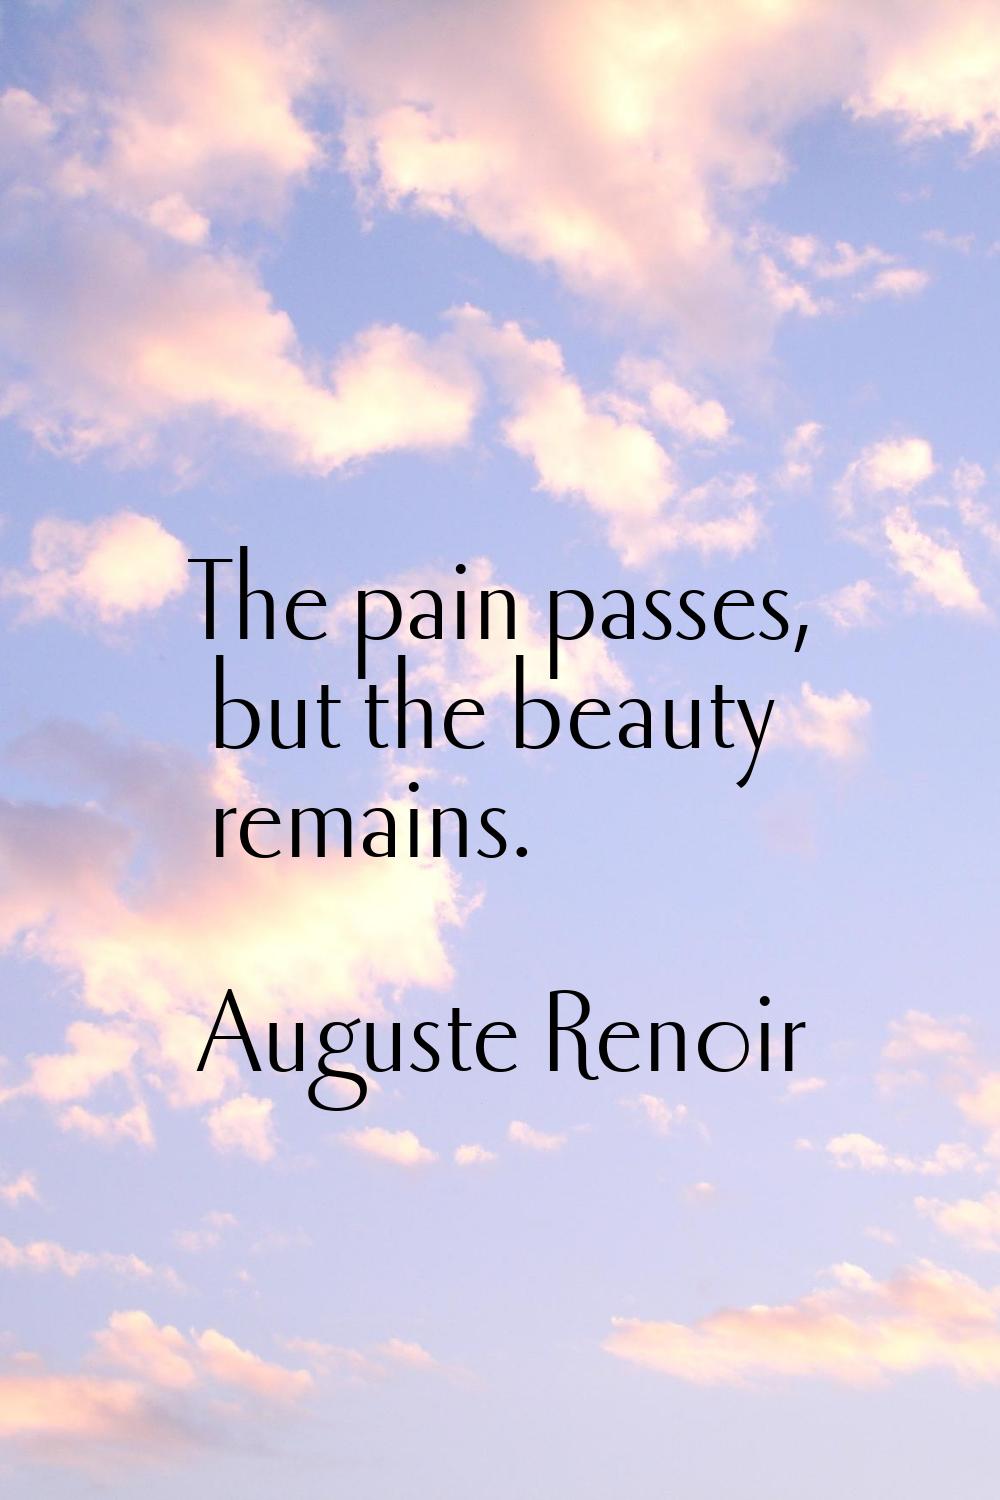 The pain passes, but the beauty remains.